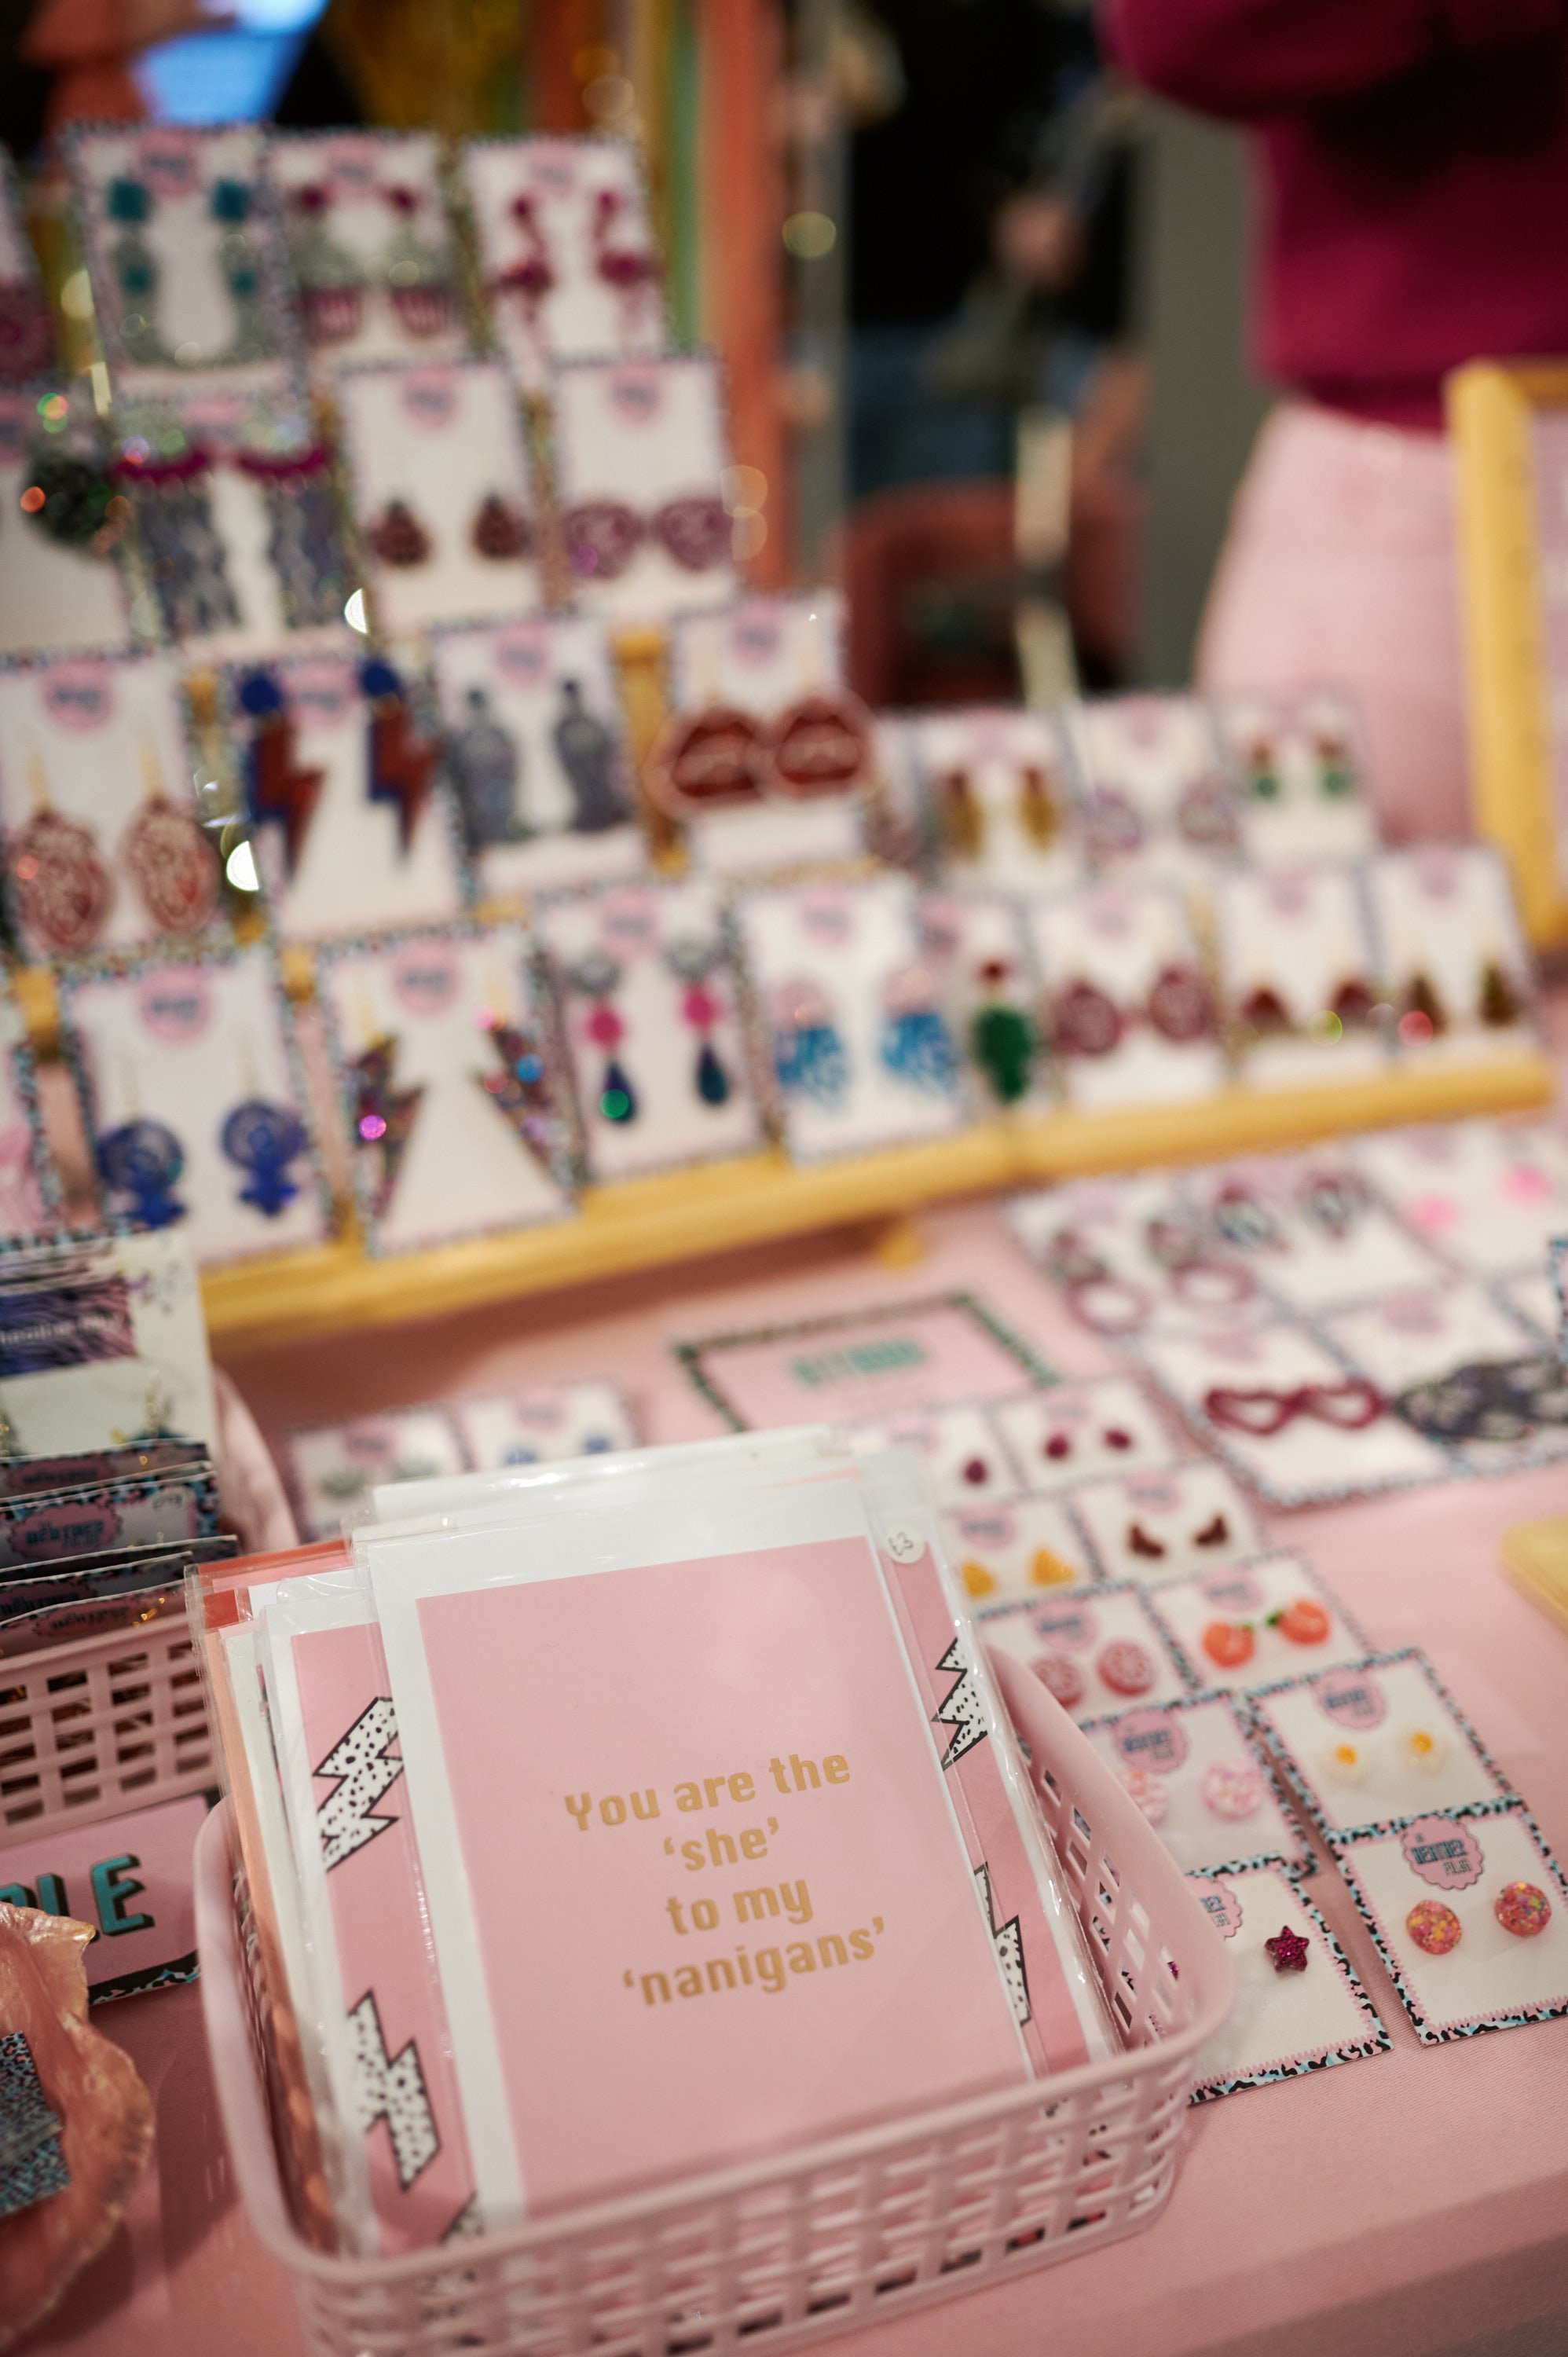  A pink table full of glittery accessories and a basket of greetings cards. One of the cards says ‘you are the ‘she’ to my nanigans.’ 